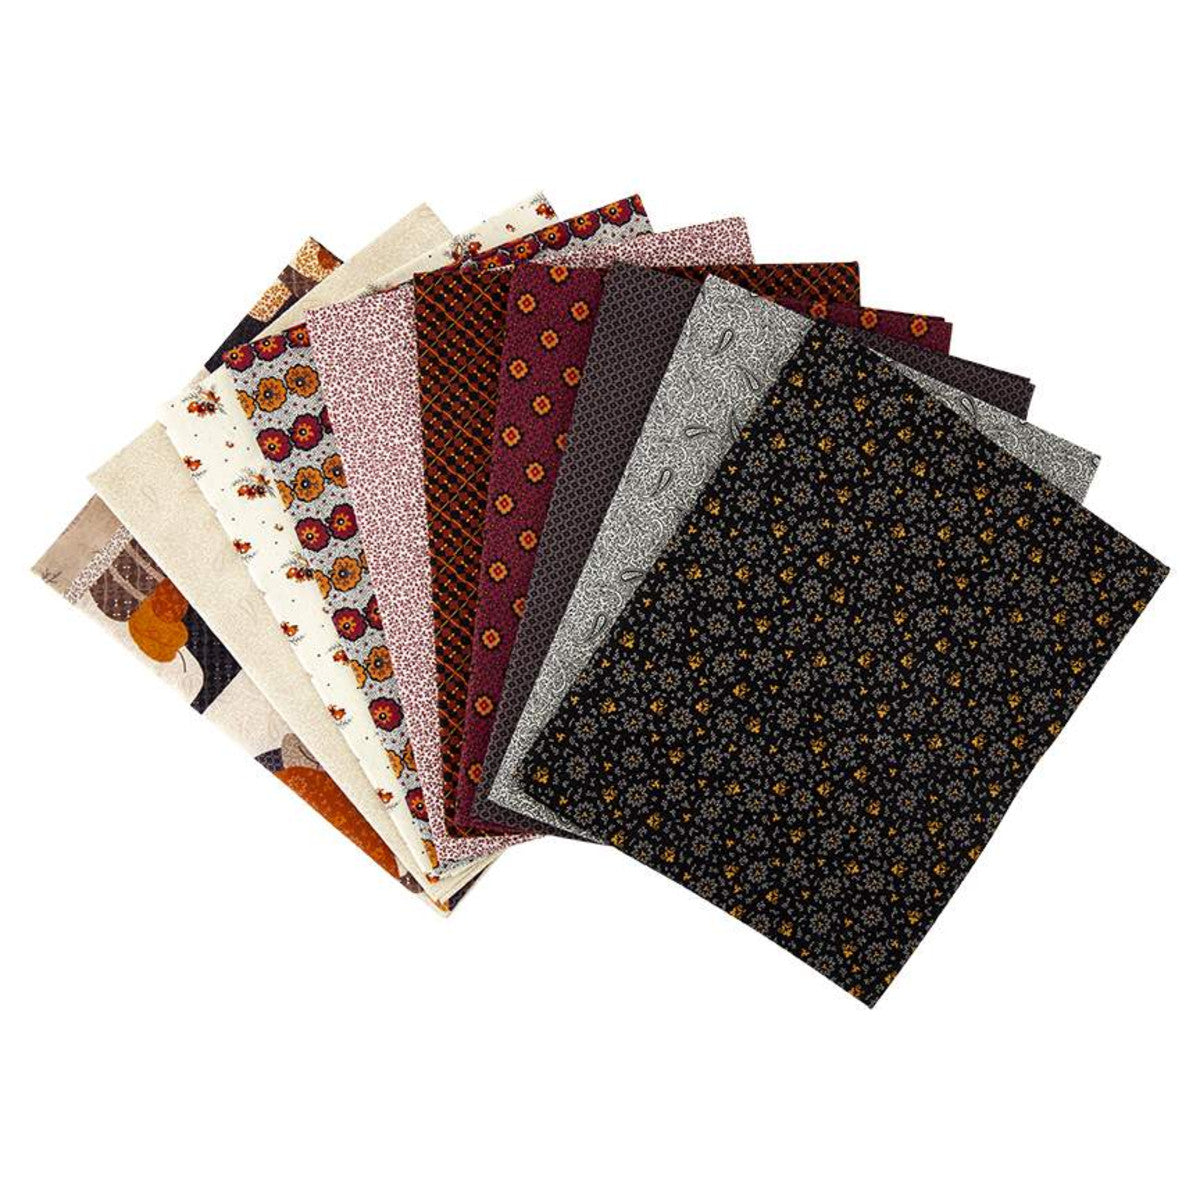 This 1-Yard precut bundle includes a 1-yard piece of each print in the black colorway (C10851-RUST, C10852-BLACK, C10854-CREAM, C10855-RUST, C10856-RUST, C10858-RUST, C10859-BLACK, C10859-CREAM, C10860-GRAY) and P10861-PANEL from the Bountiful Autumn collection by Stacy West of Buttermilk Basin Design Co. for Riley Blake Designs for a total of 9 yards and 1 panel.  100% cotton  Width: 43"/44"